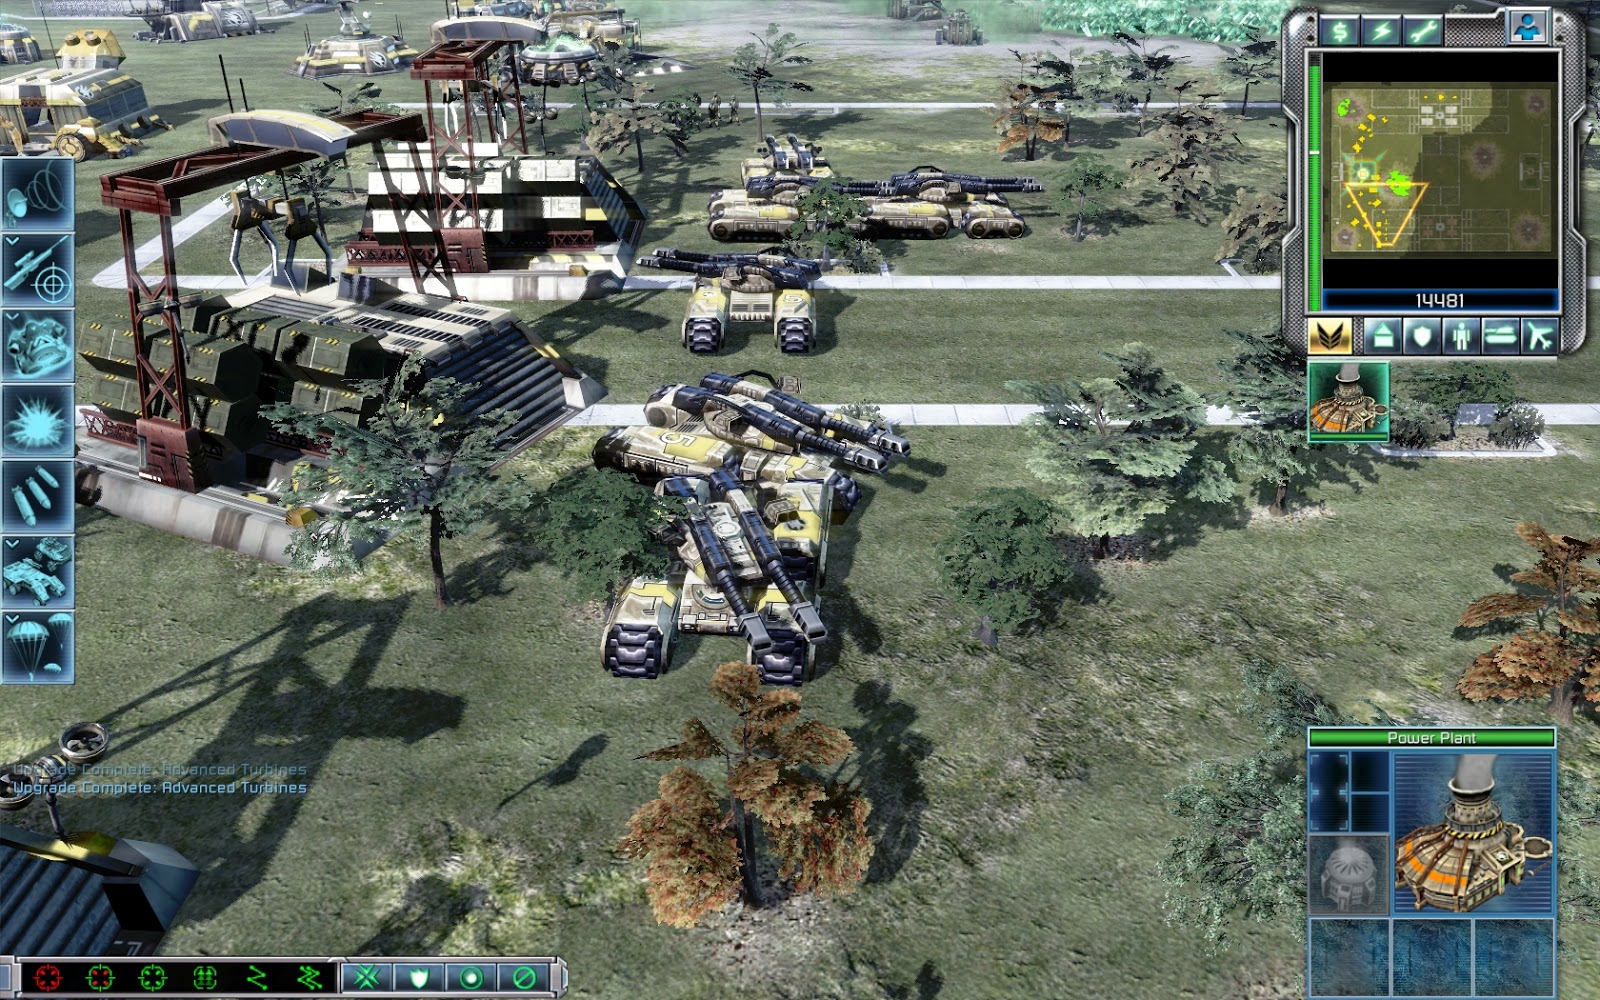 Command And Conquer 4 Tiberian Twilight hack activation code